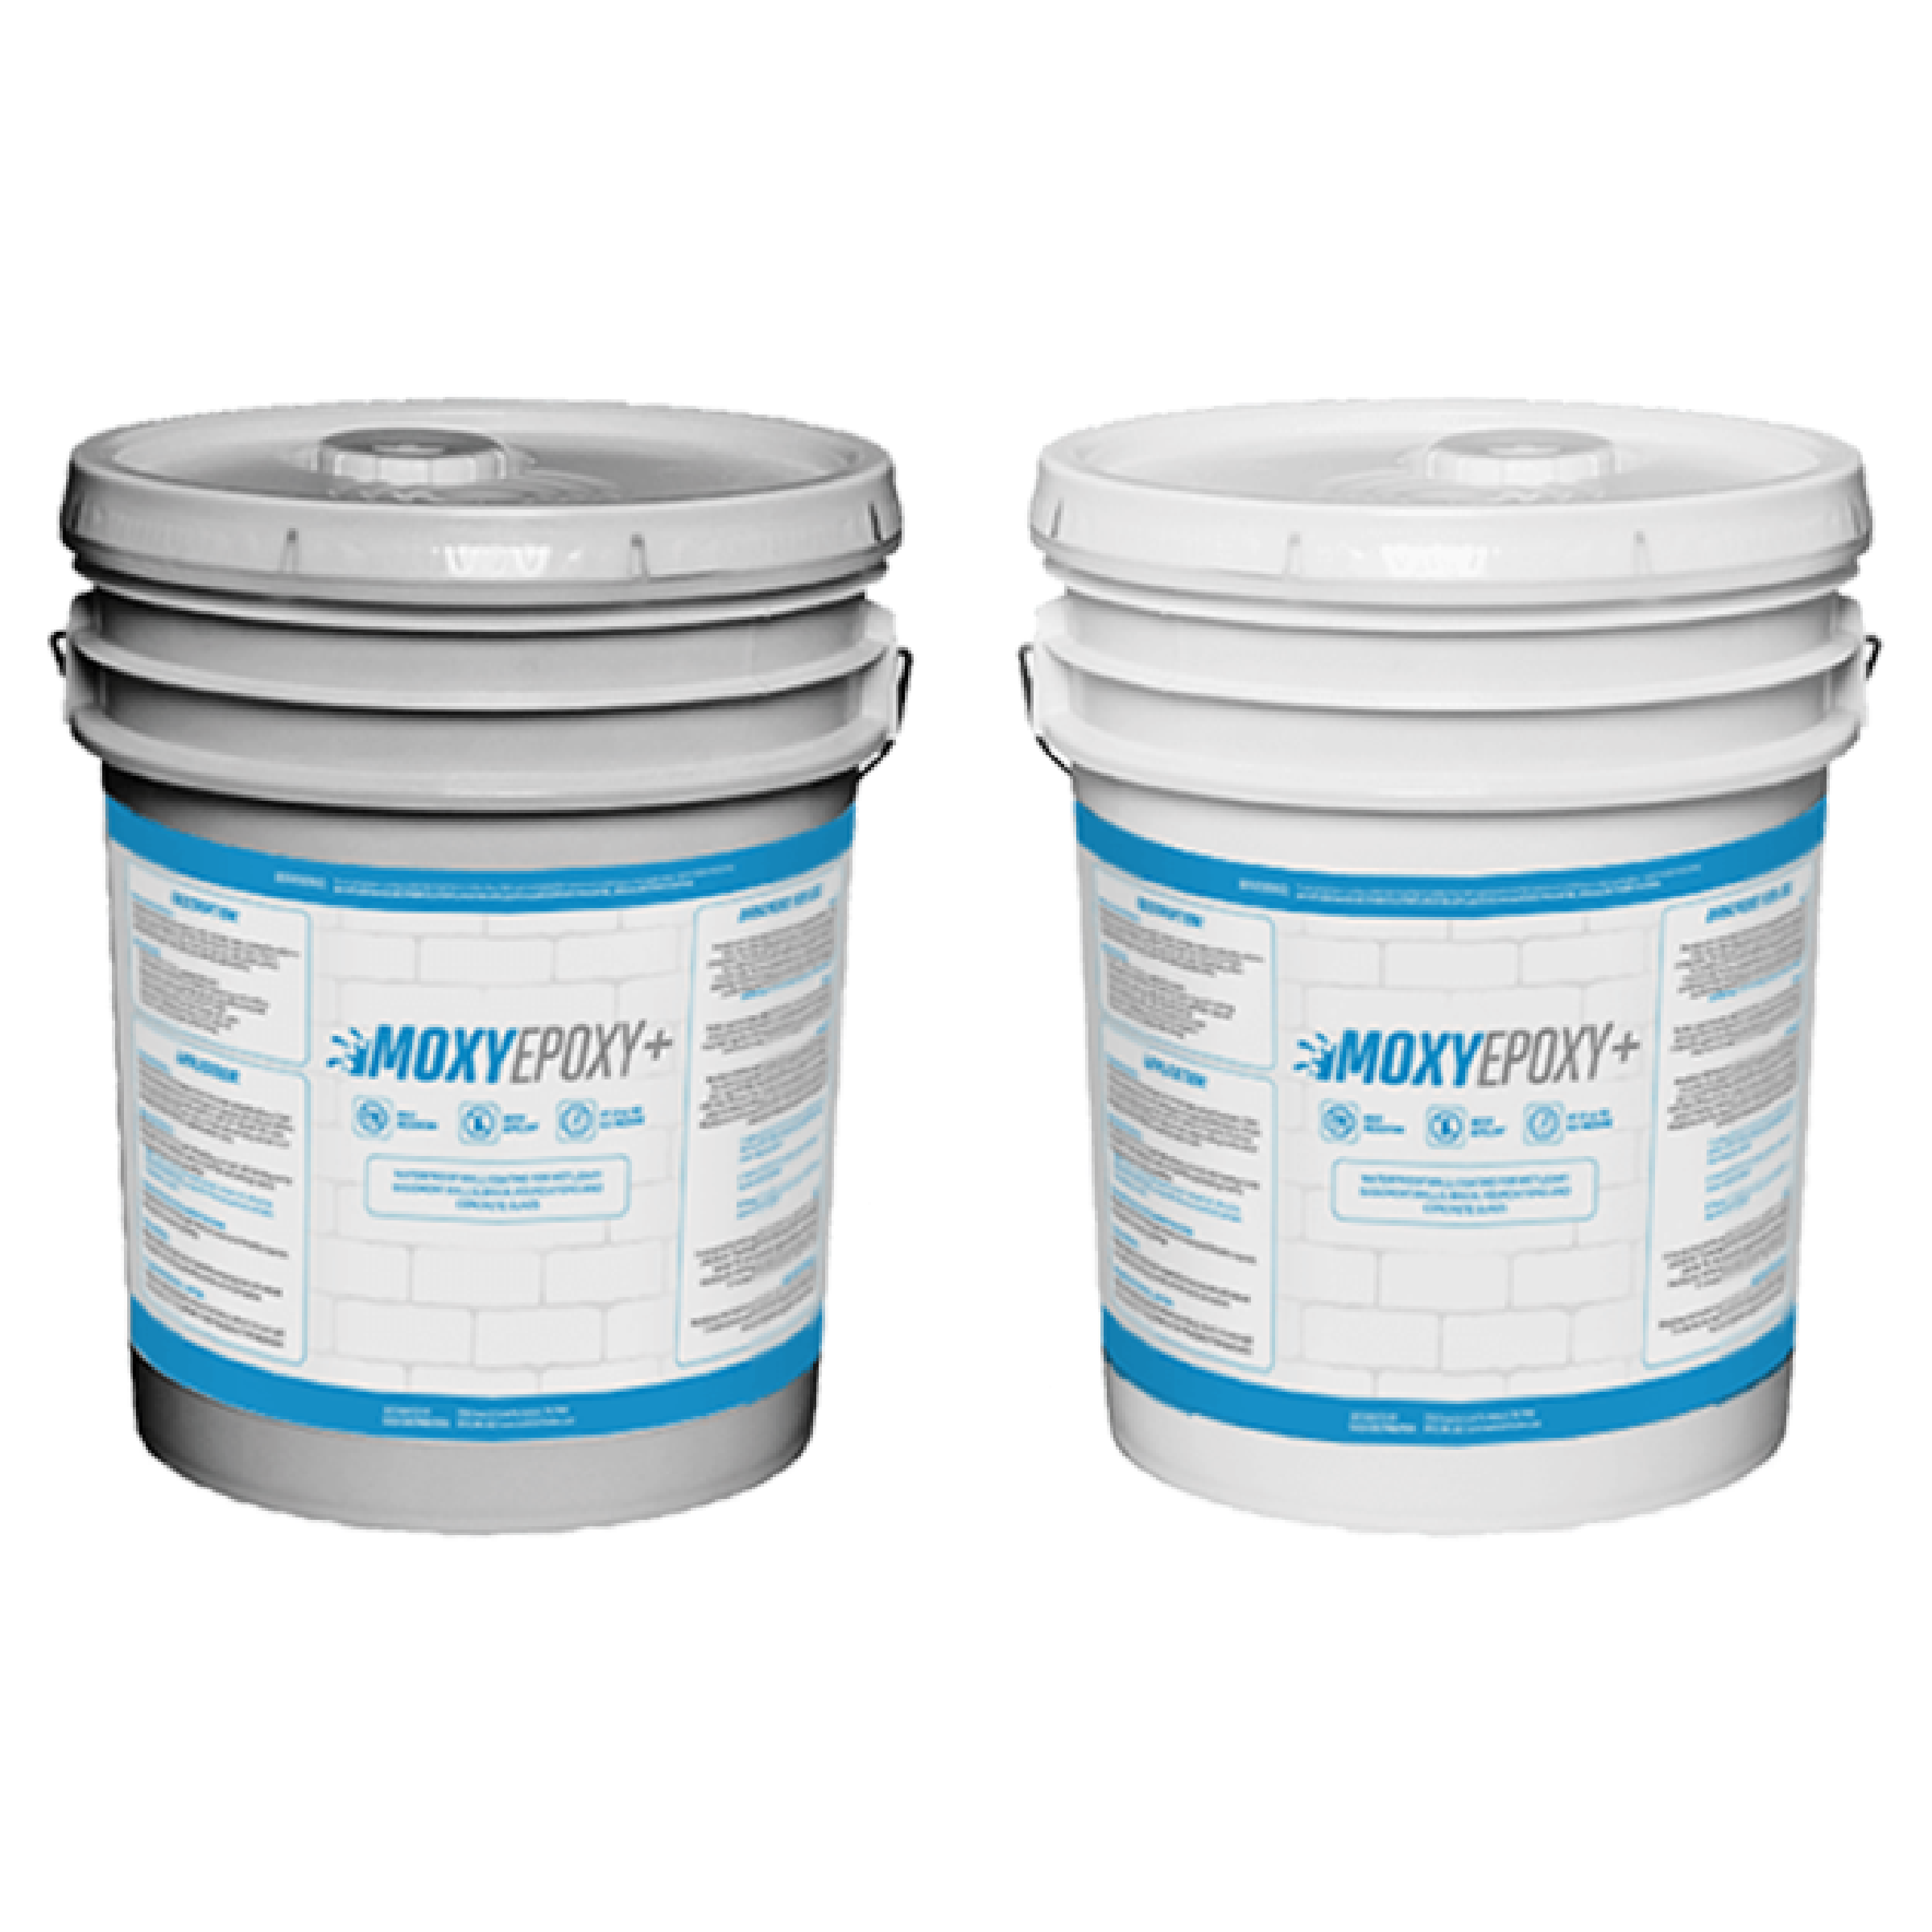 Waterproof Epoxy Floor & Wall Paint 5L – Chemical Building Products